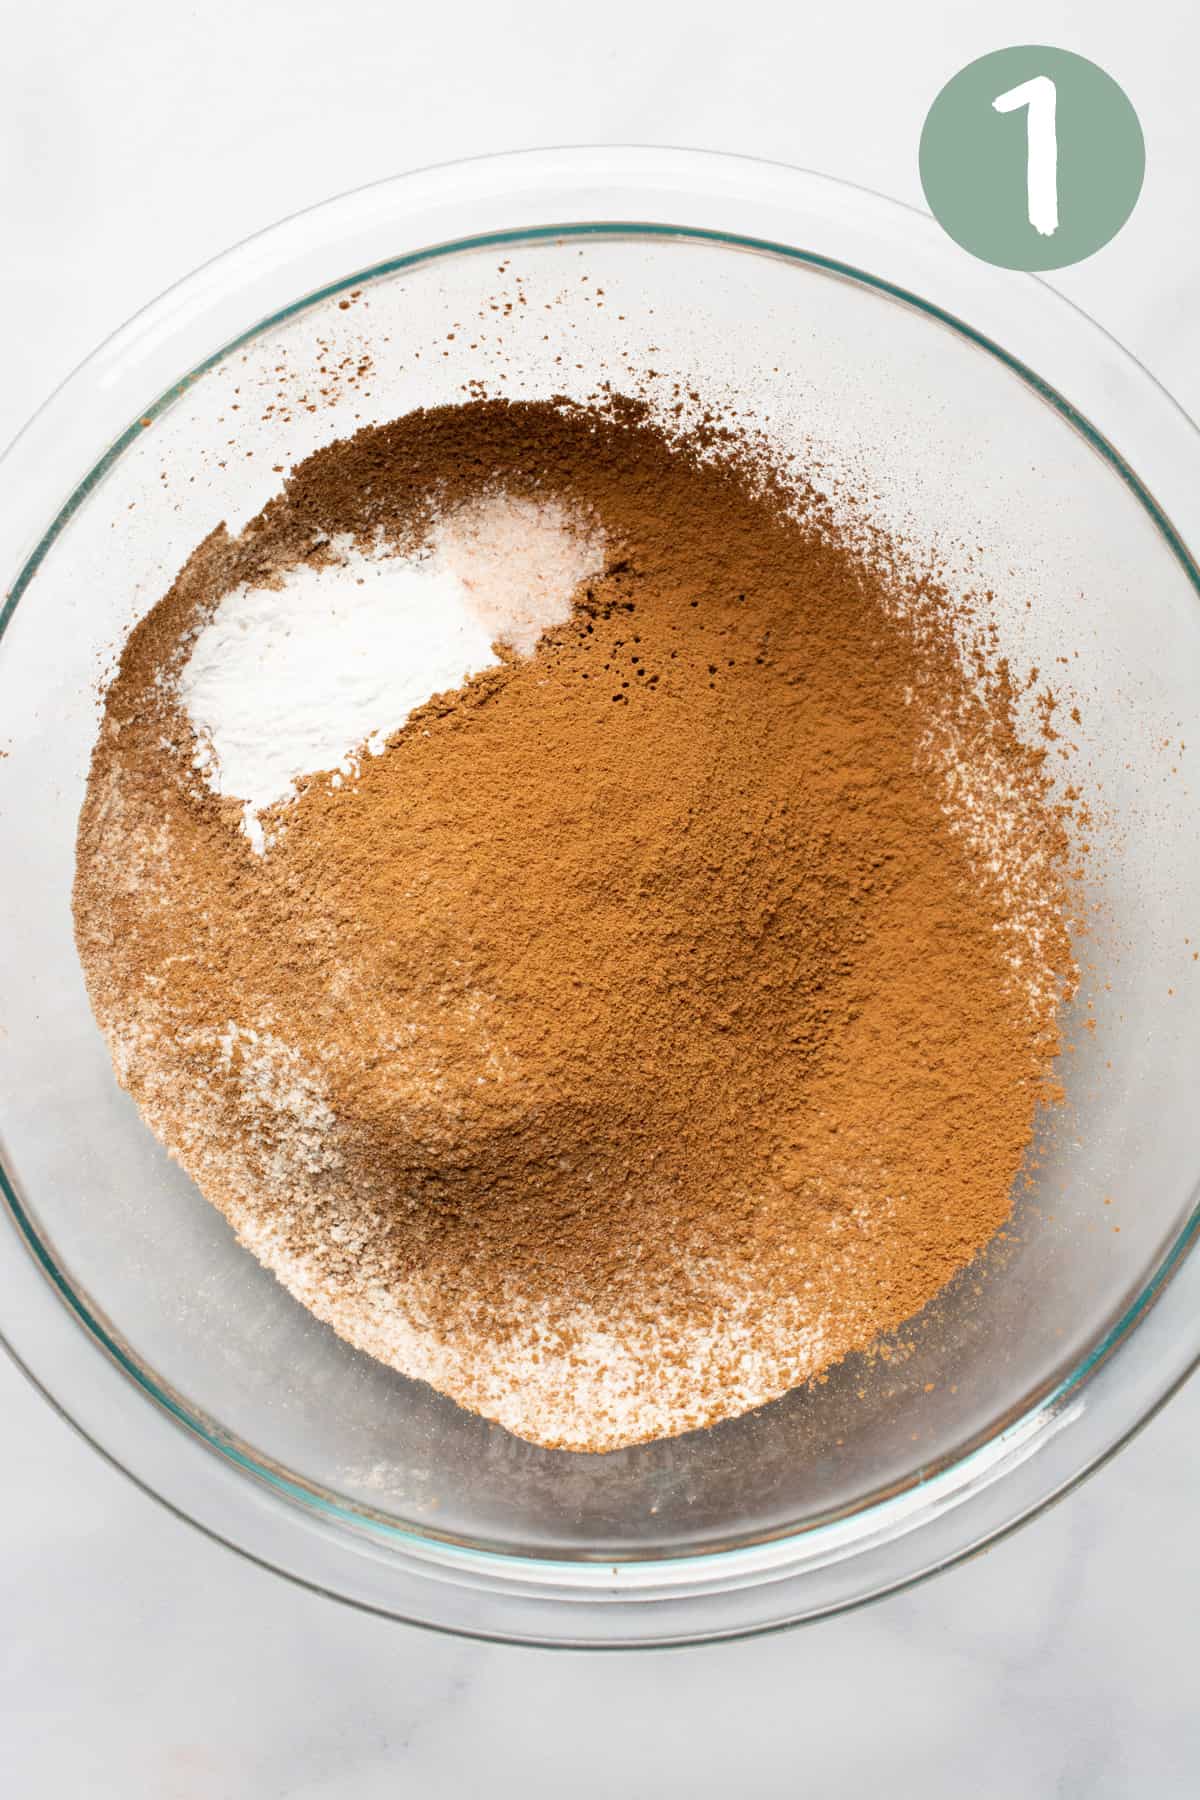 A glass bowl with sifted cocoa powder, flour and baking powder.